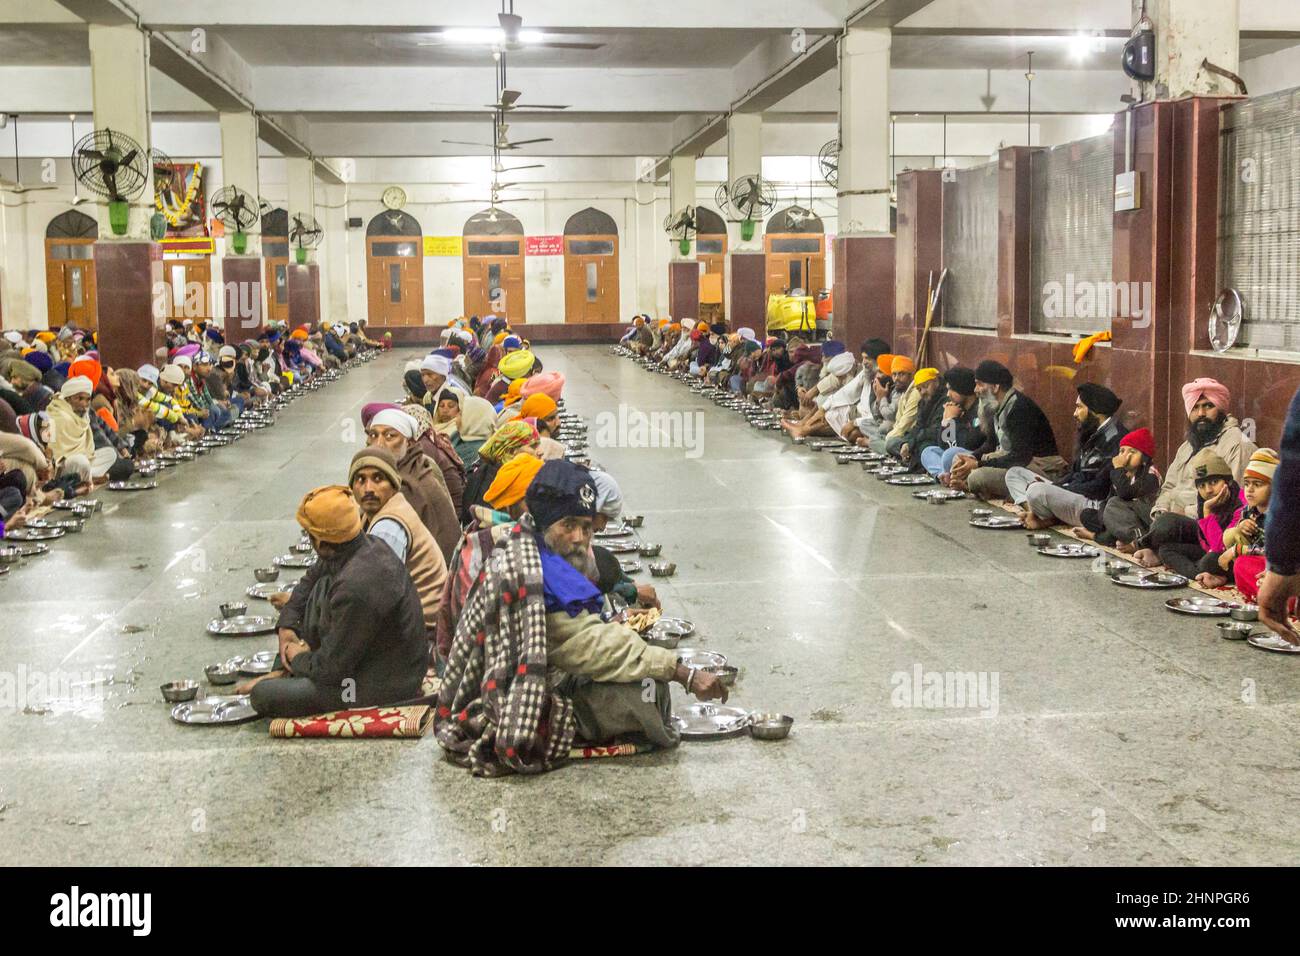 people wait for food in the food  area at the Harimandir Sahib, the Golden temple complex in Amritsar Stock Photo